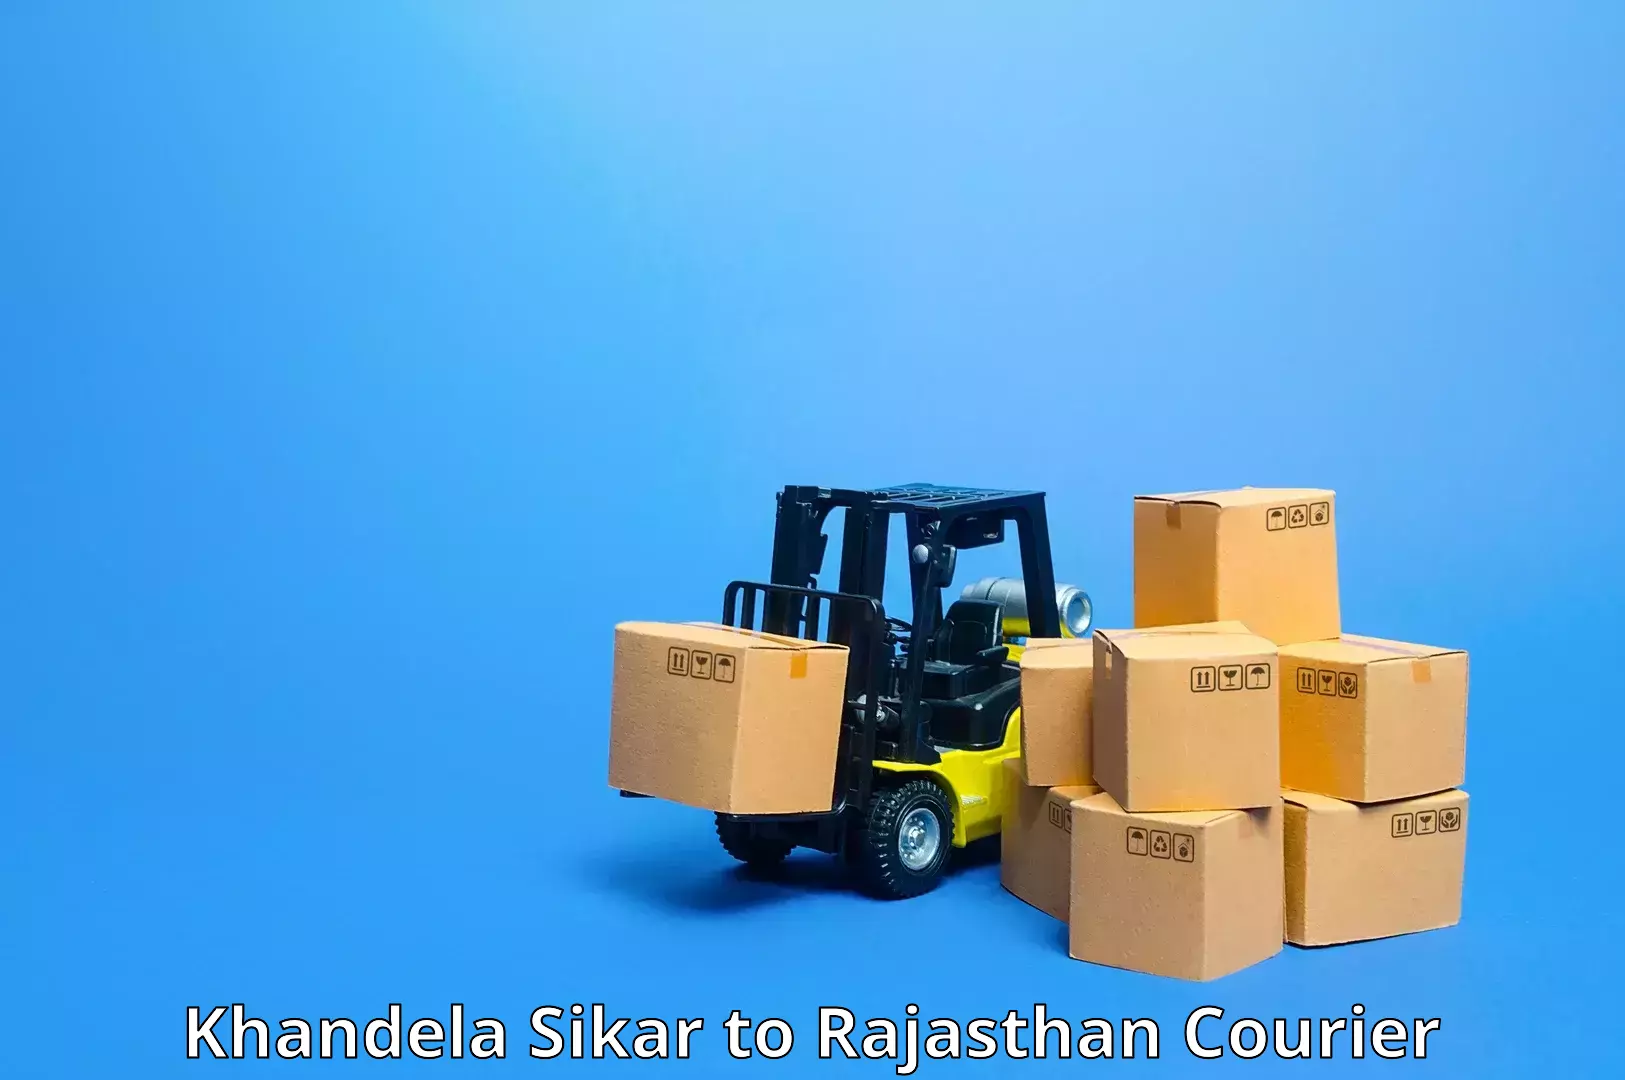 Advanced shipping services Khandela Sikar to Lalsot